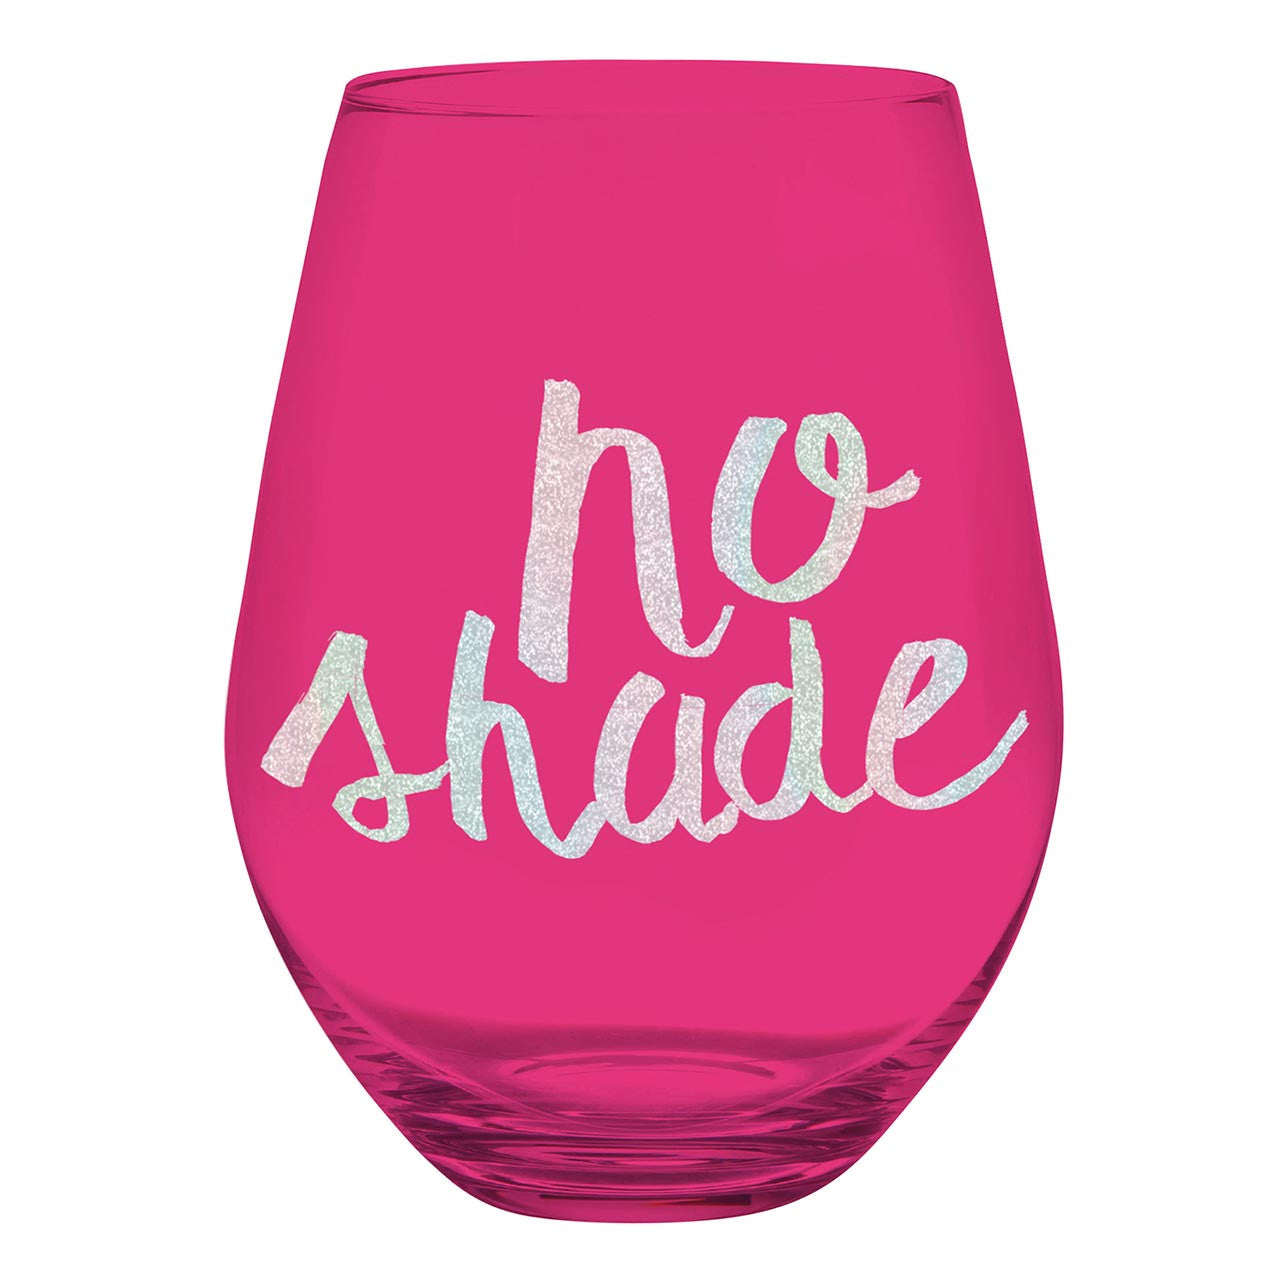 No Shade Jumbo Stemless Wine Glass in Tinted Bright Pink | 30oz Holds a Full Bottle of Wine